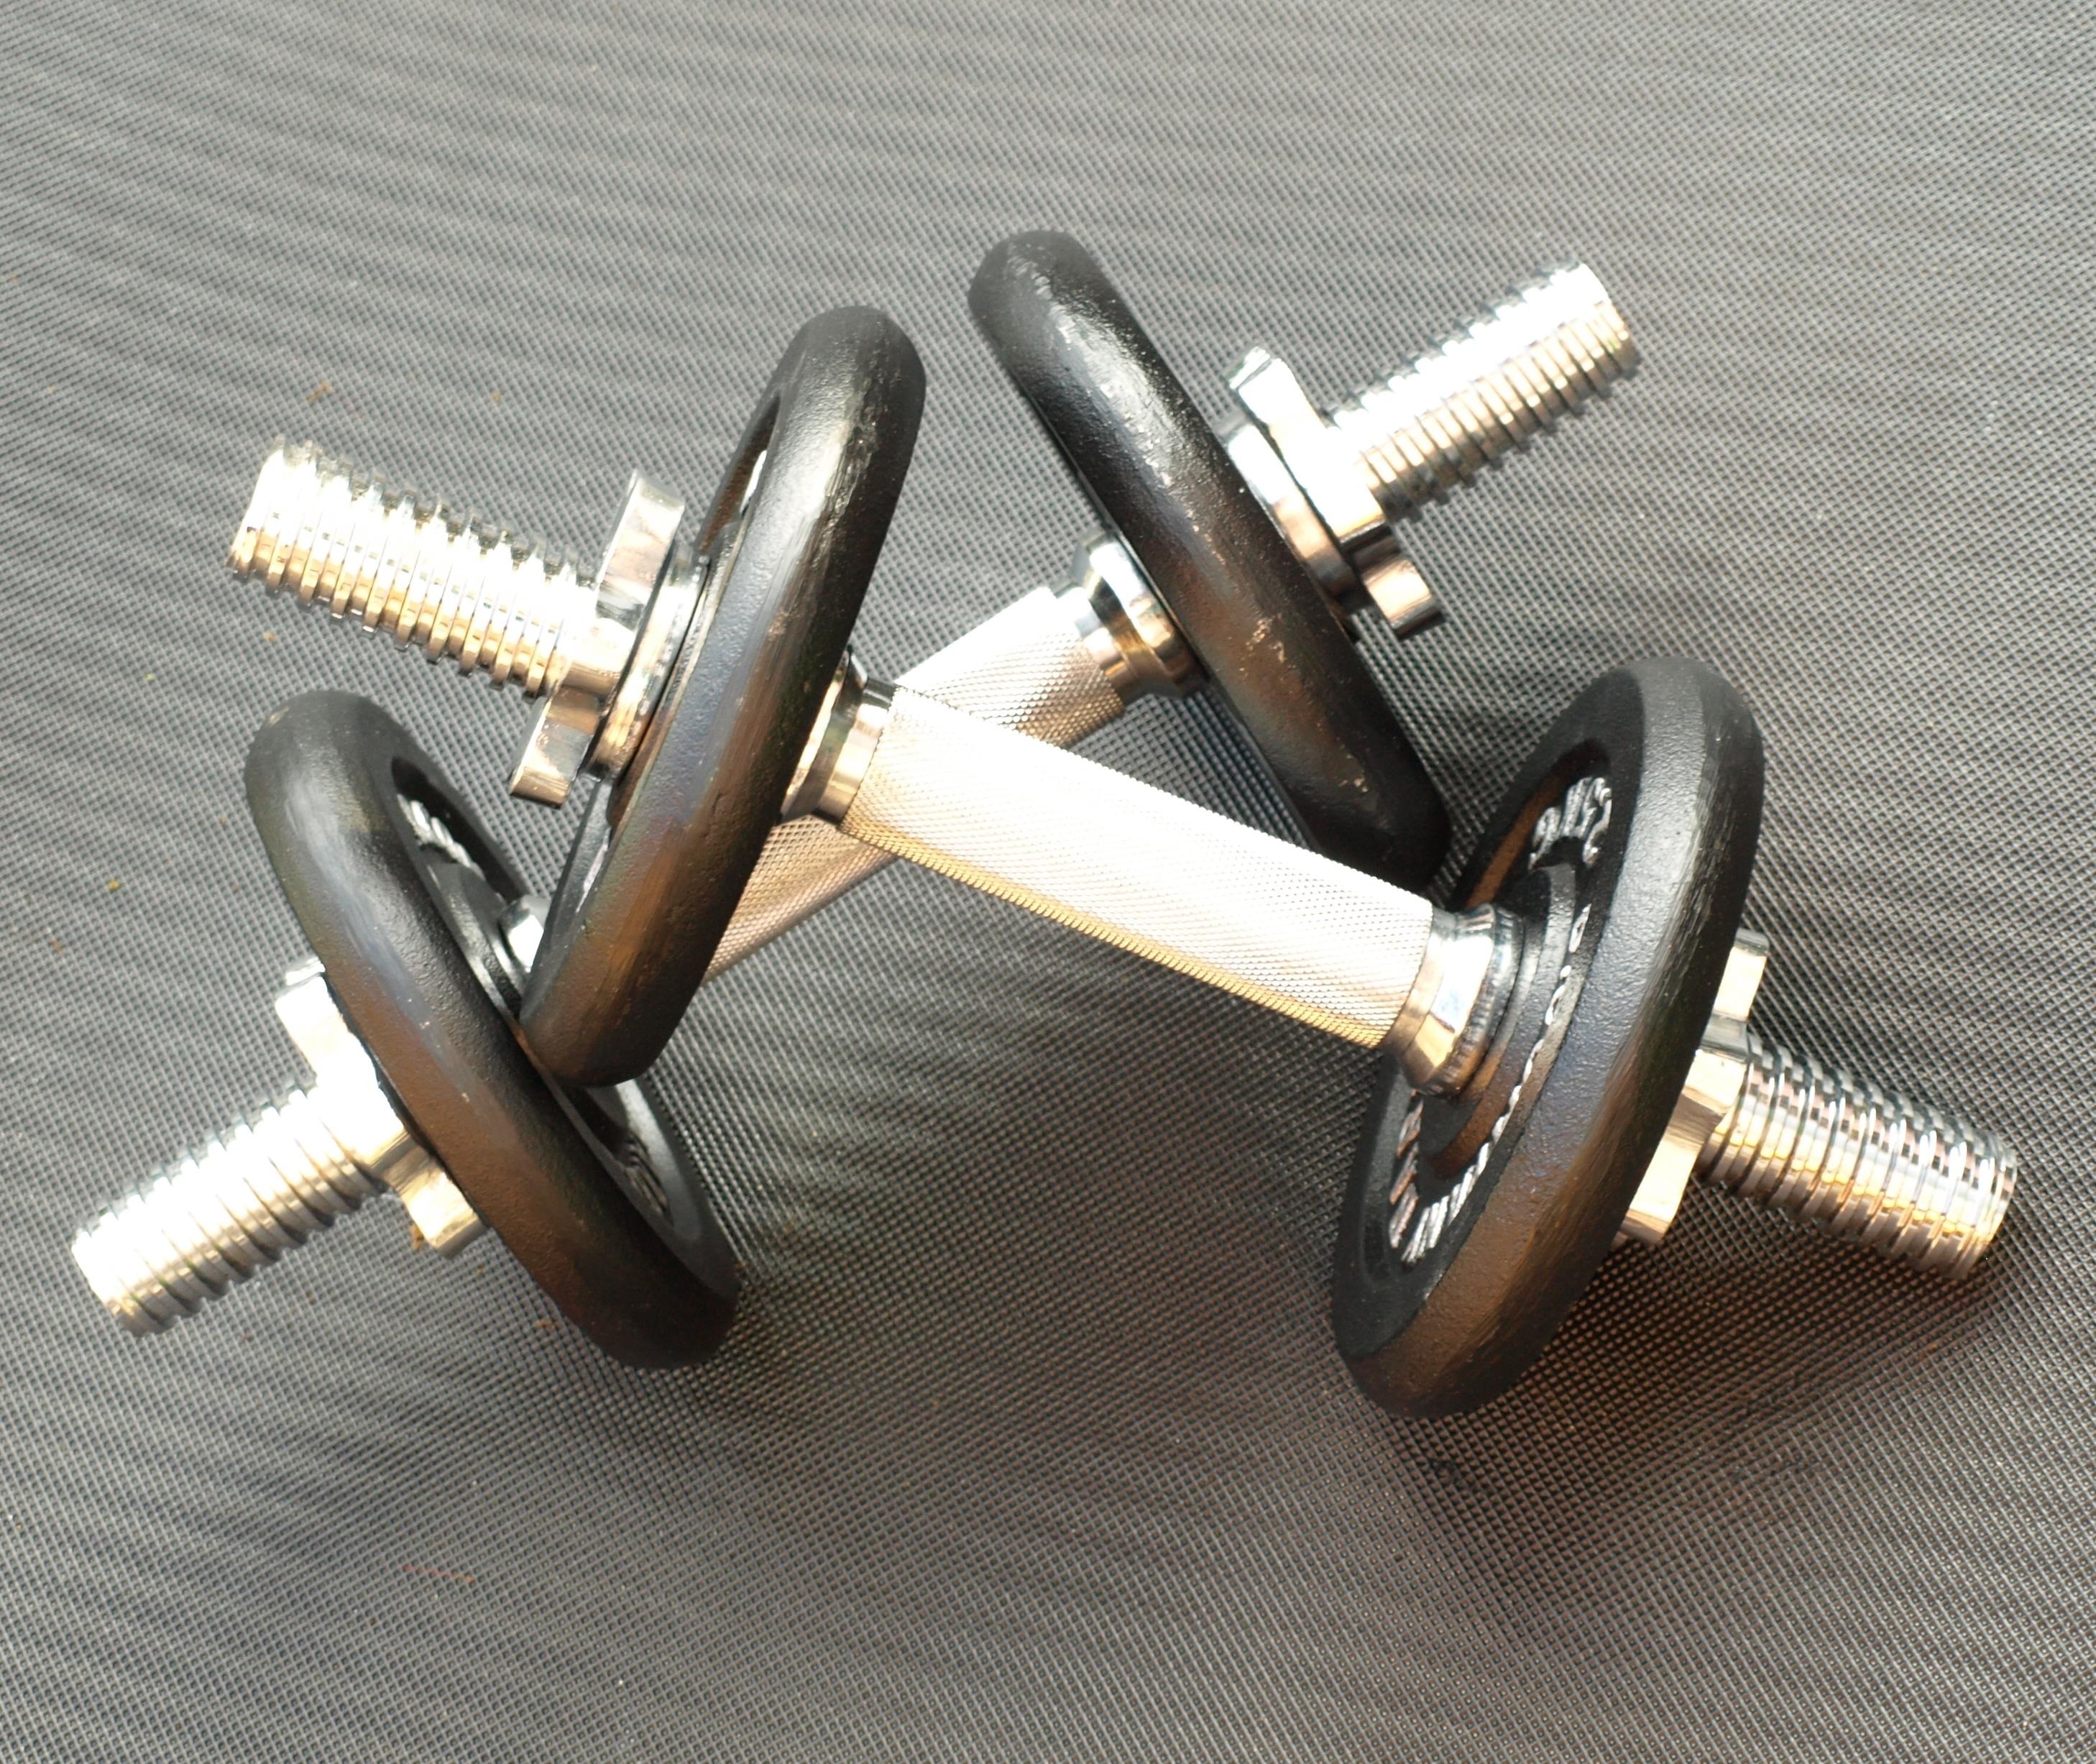 Dumbbells, Weight Plates, Dumbbell Pair, no people, close-up